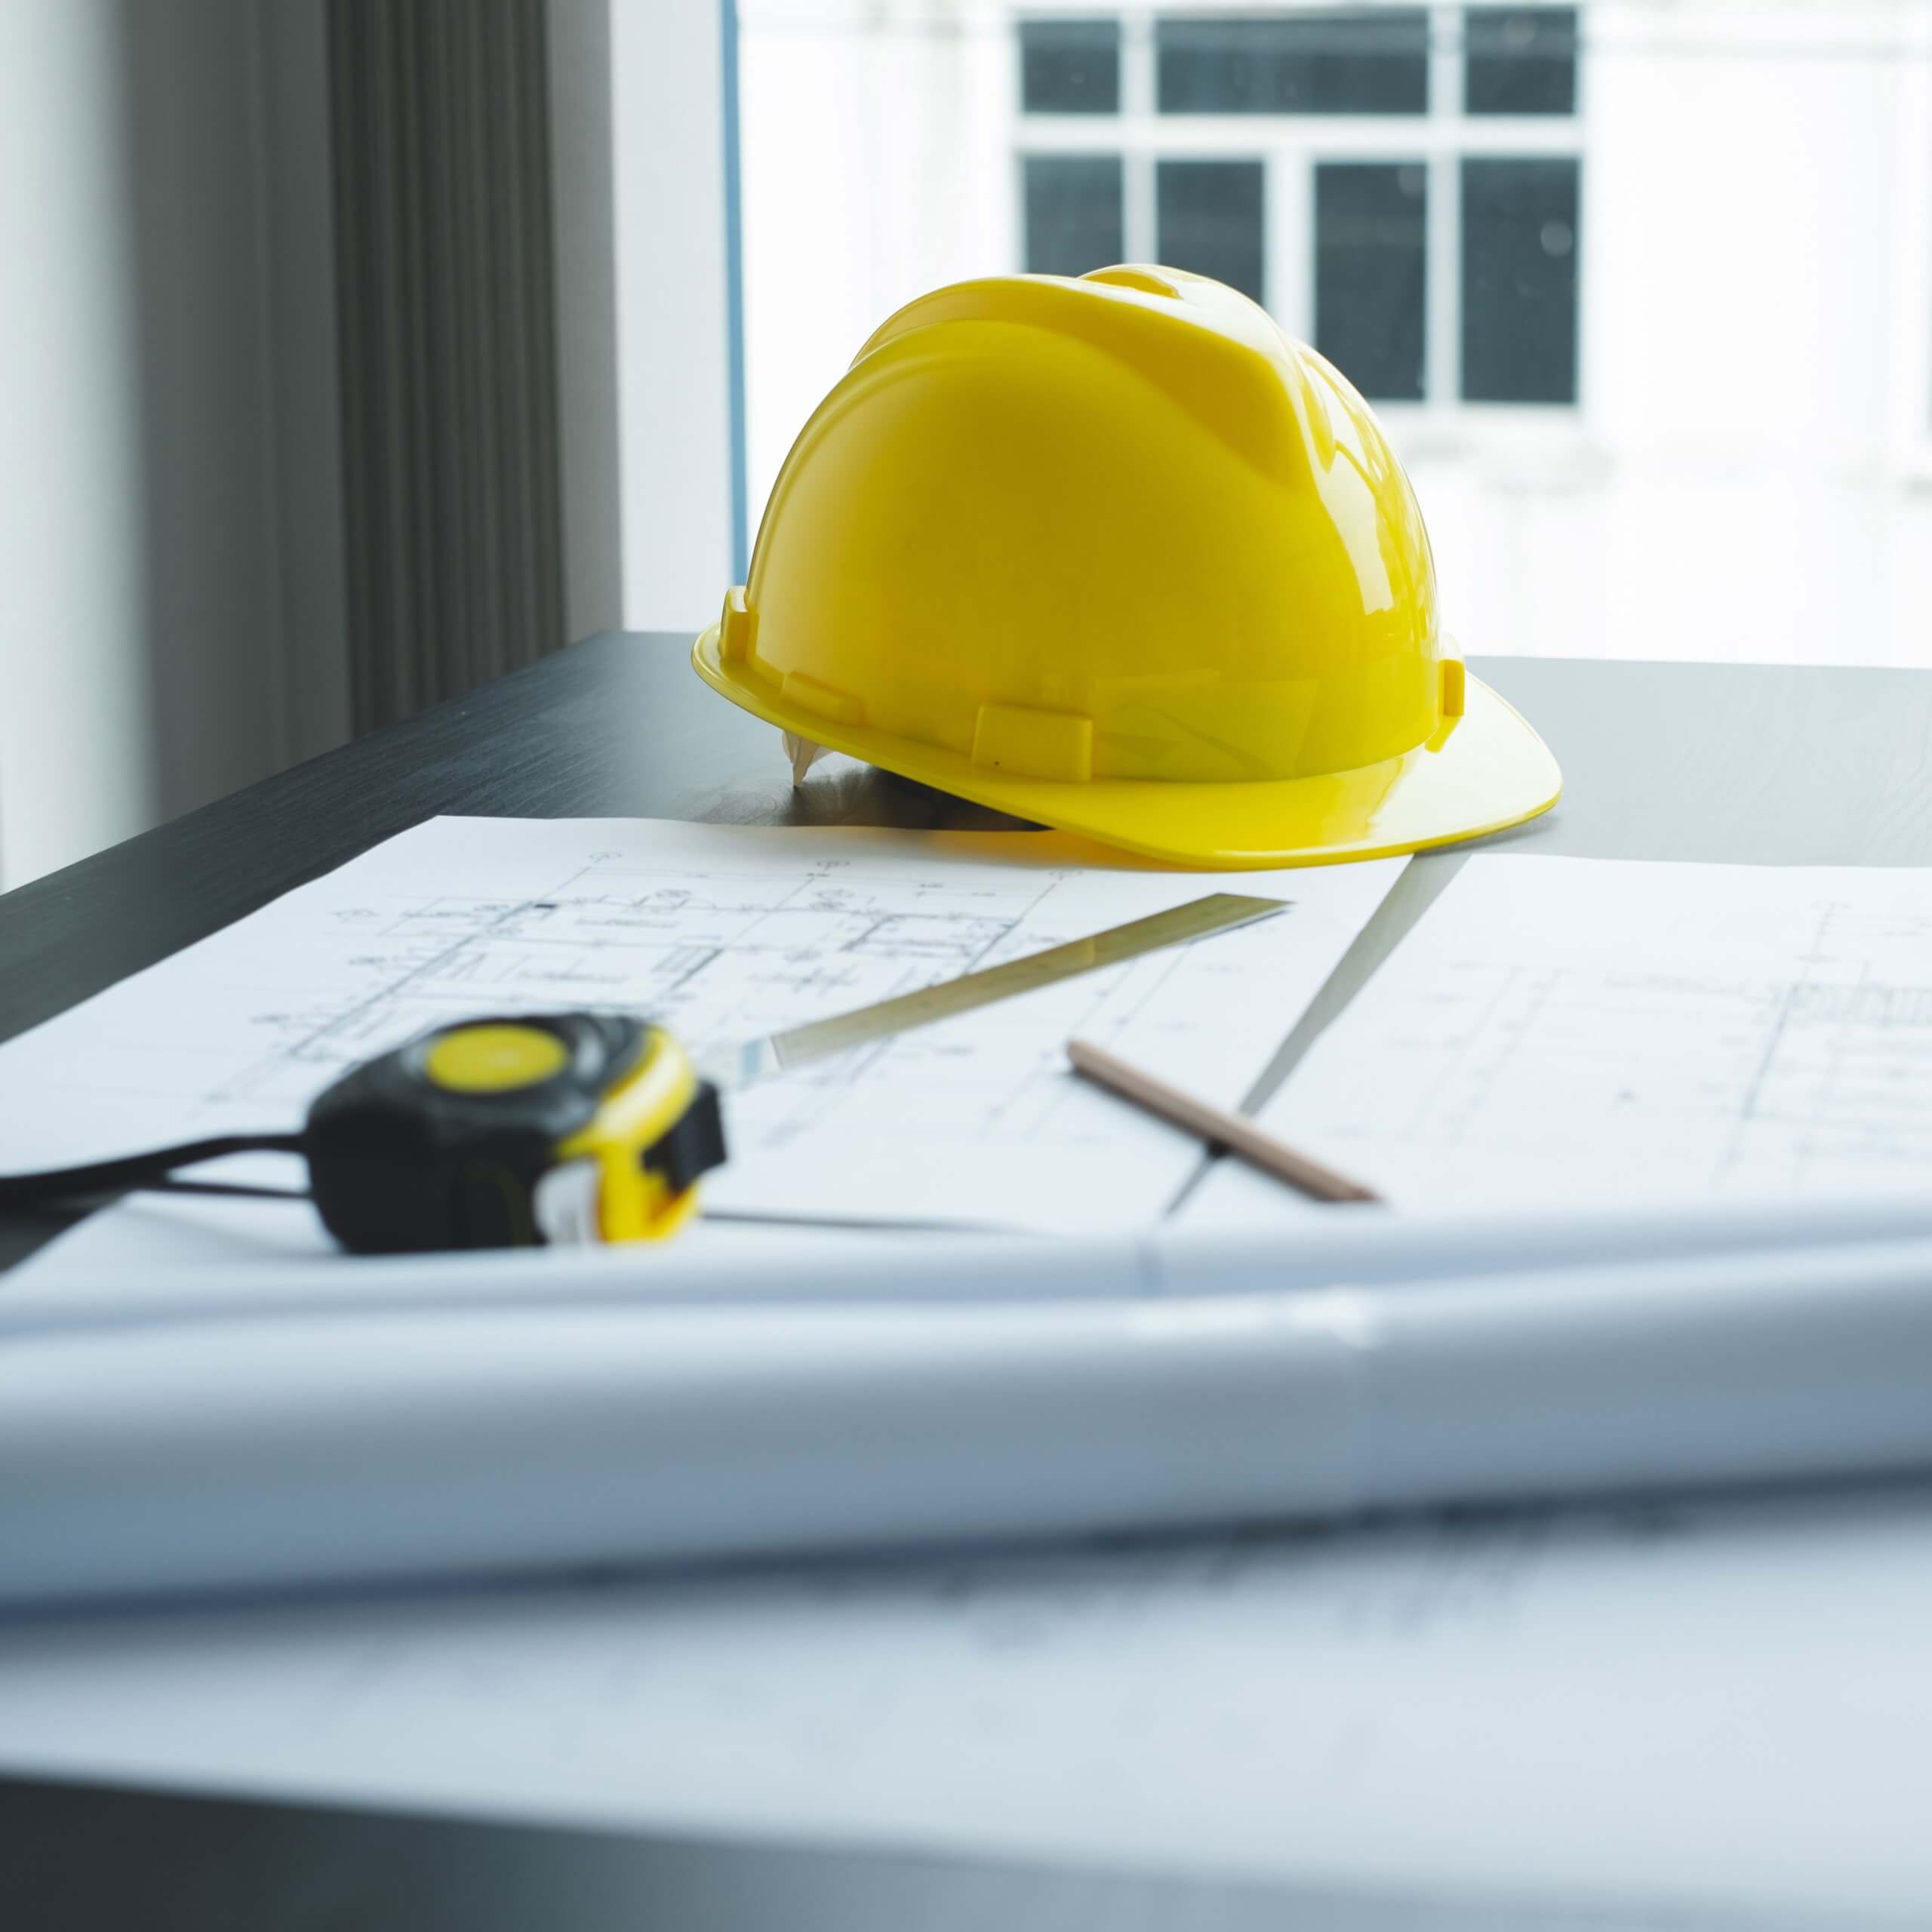 Safety helmet with measuring tape on documents from a building site.